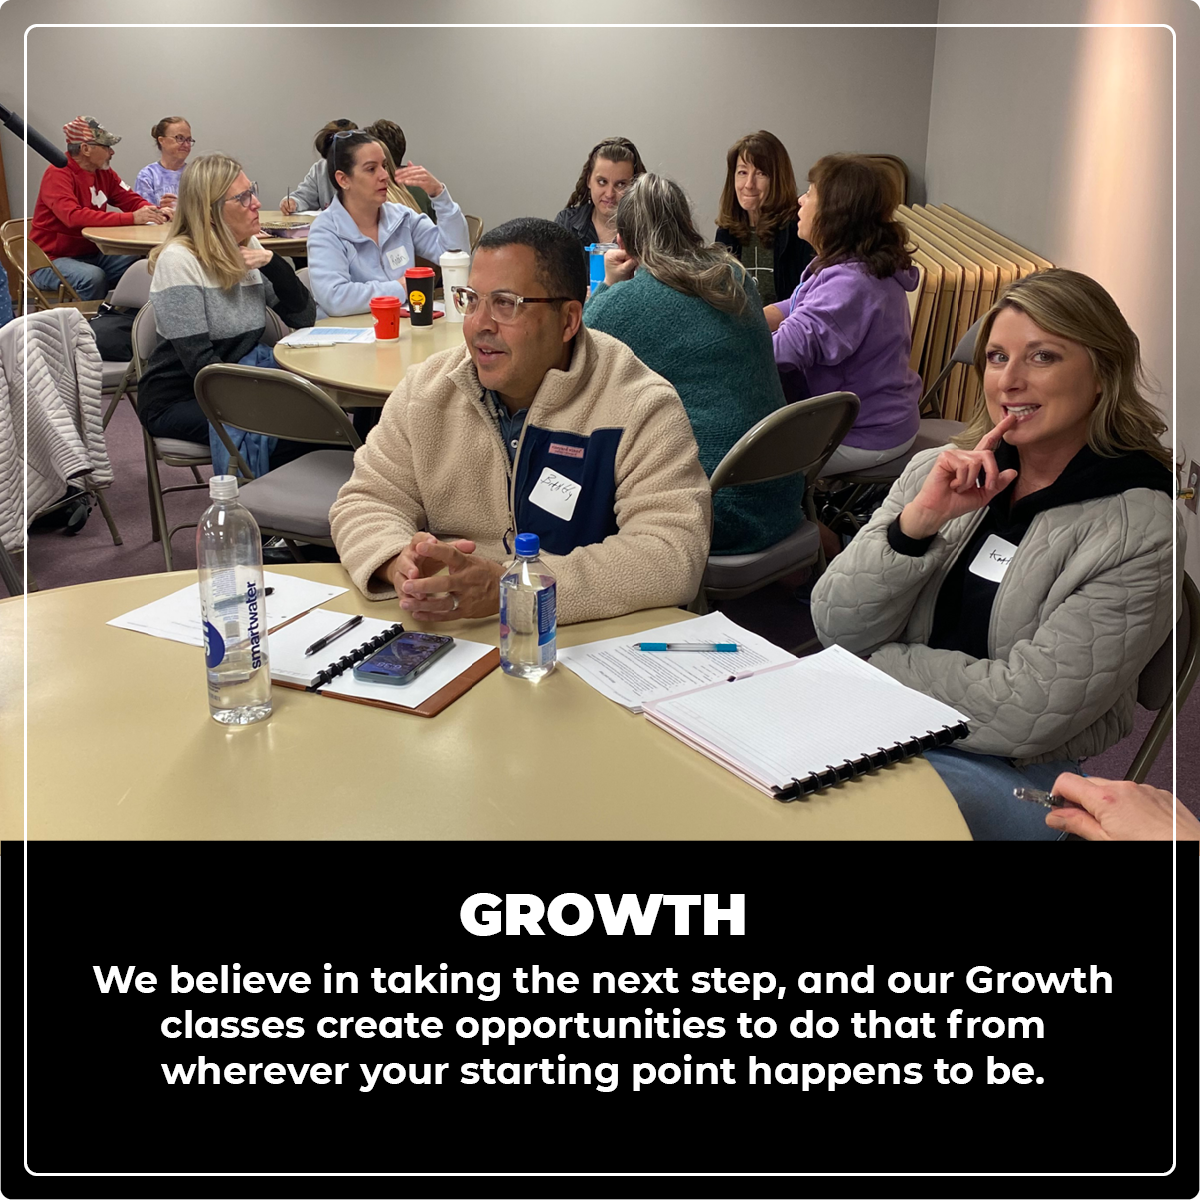 Growth: We believe in taking the next step, and our Growth classes create opportunities to do that from wherever your starting point happens to be.